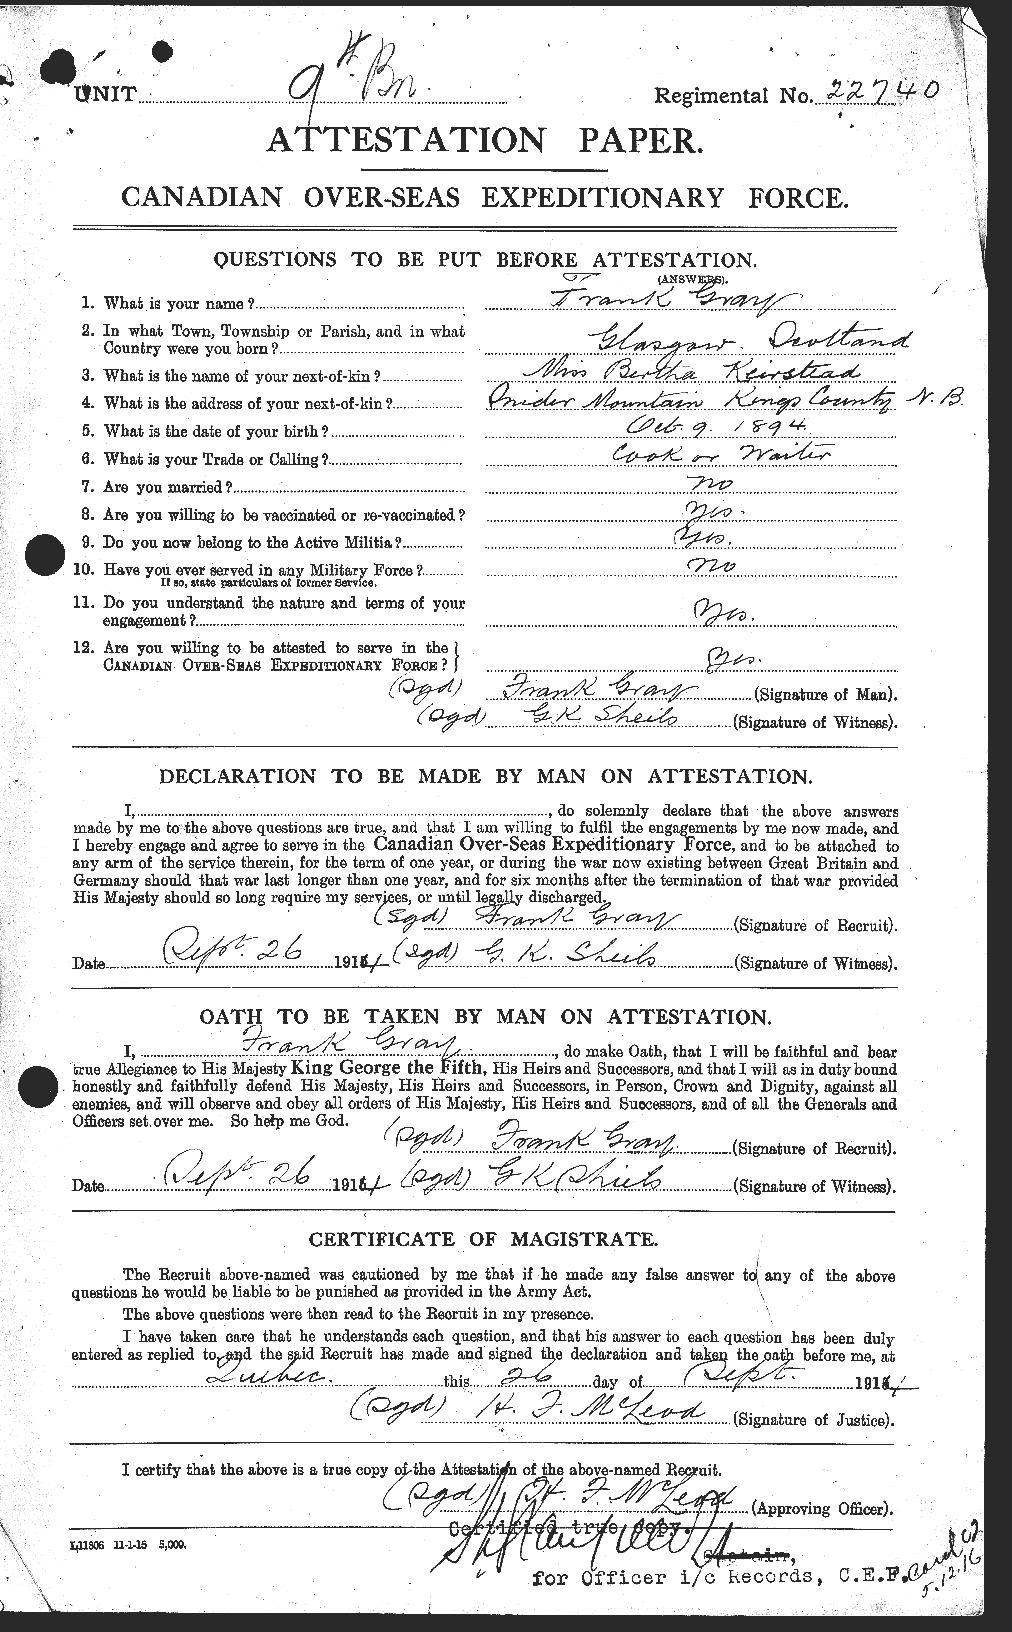 Personnel Records of the First World War - CEF 361535a